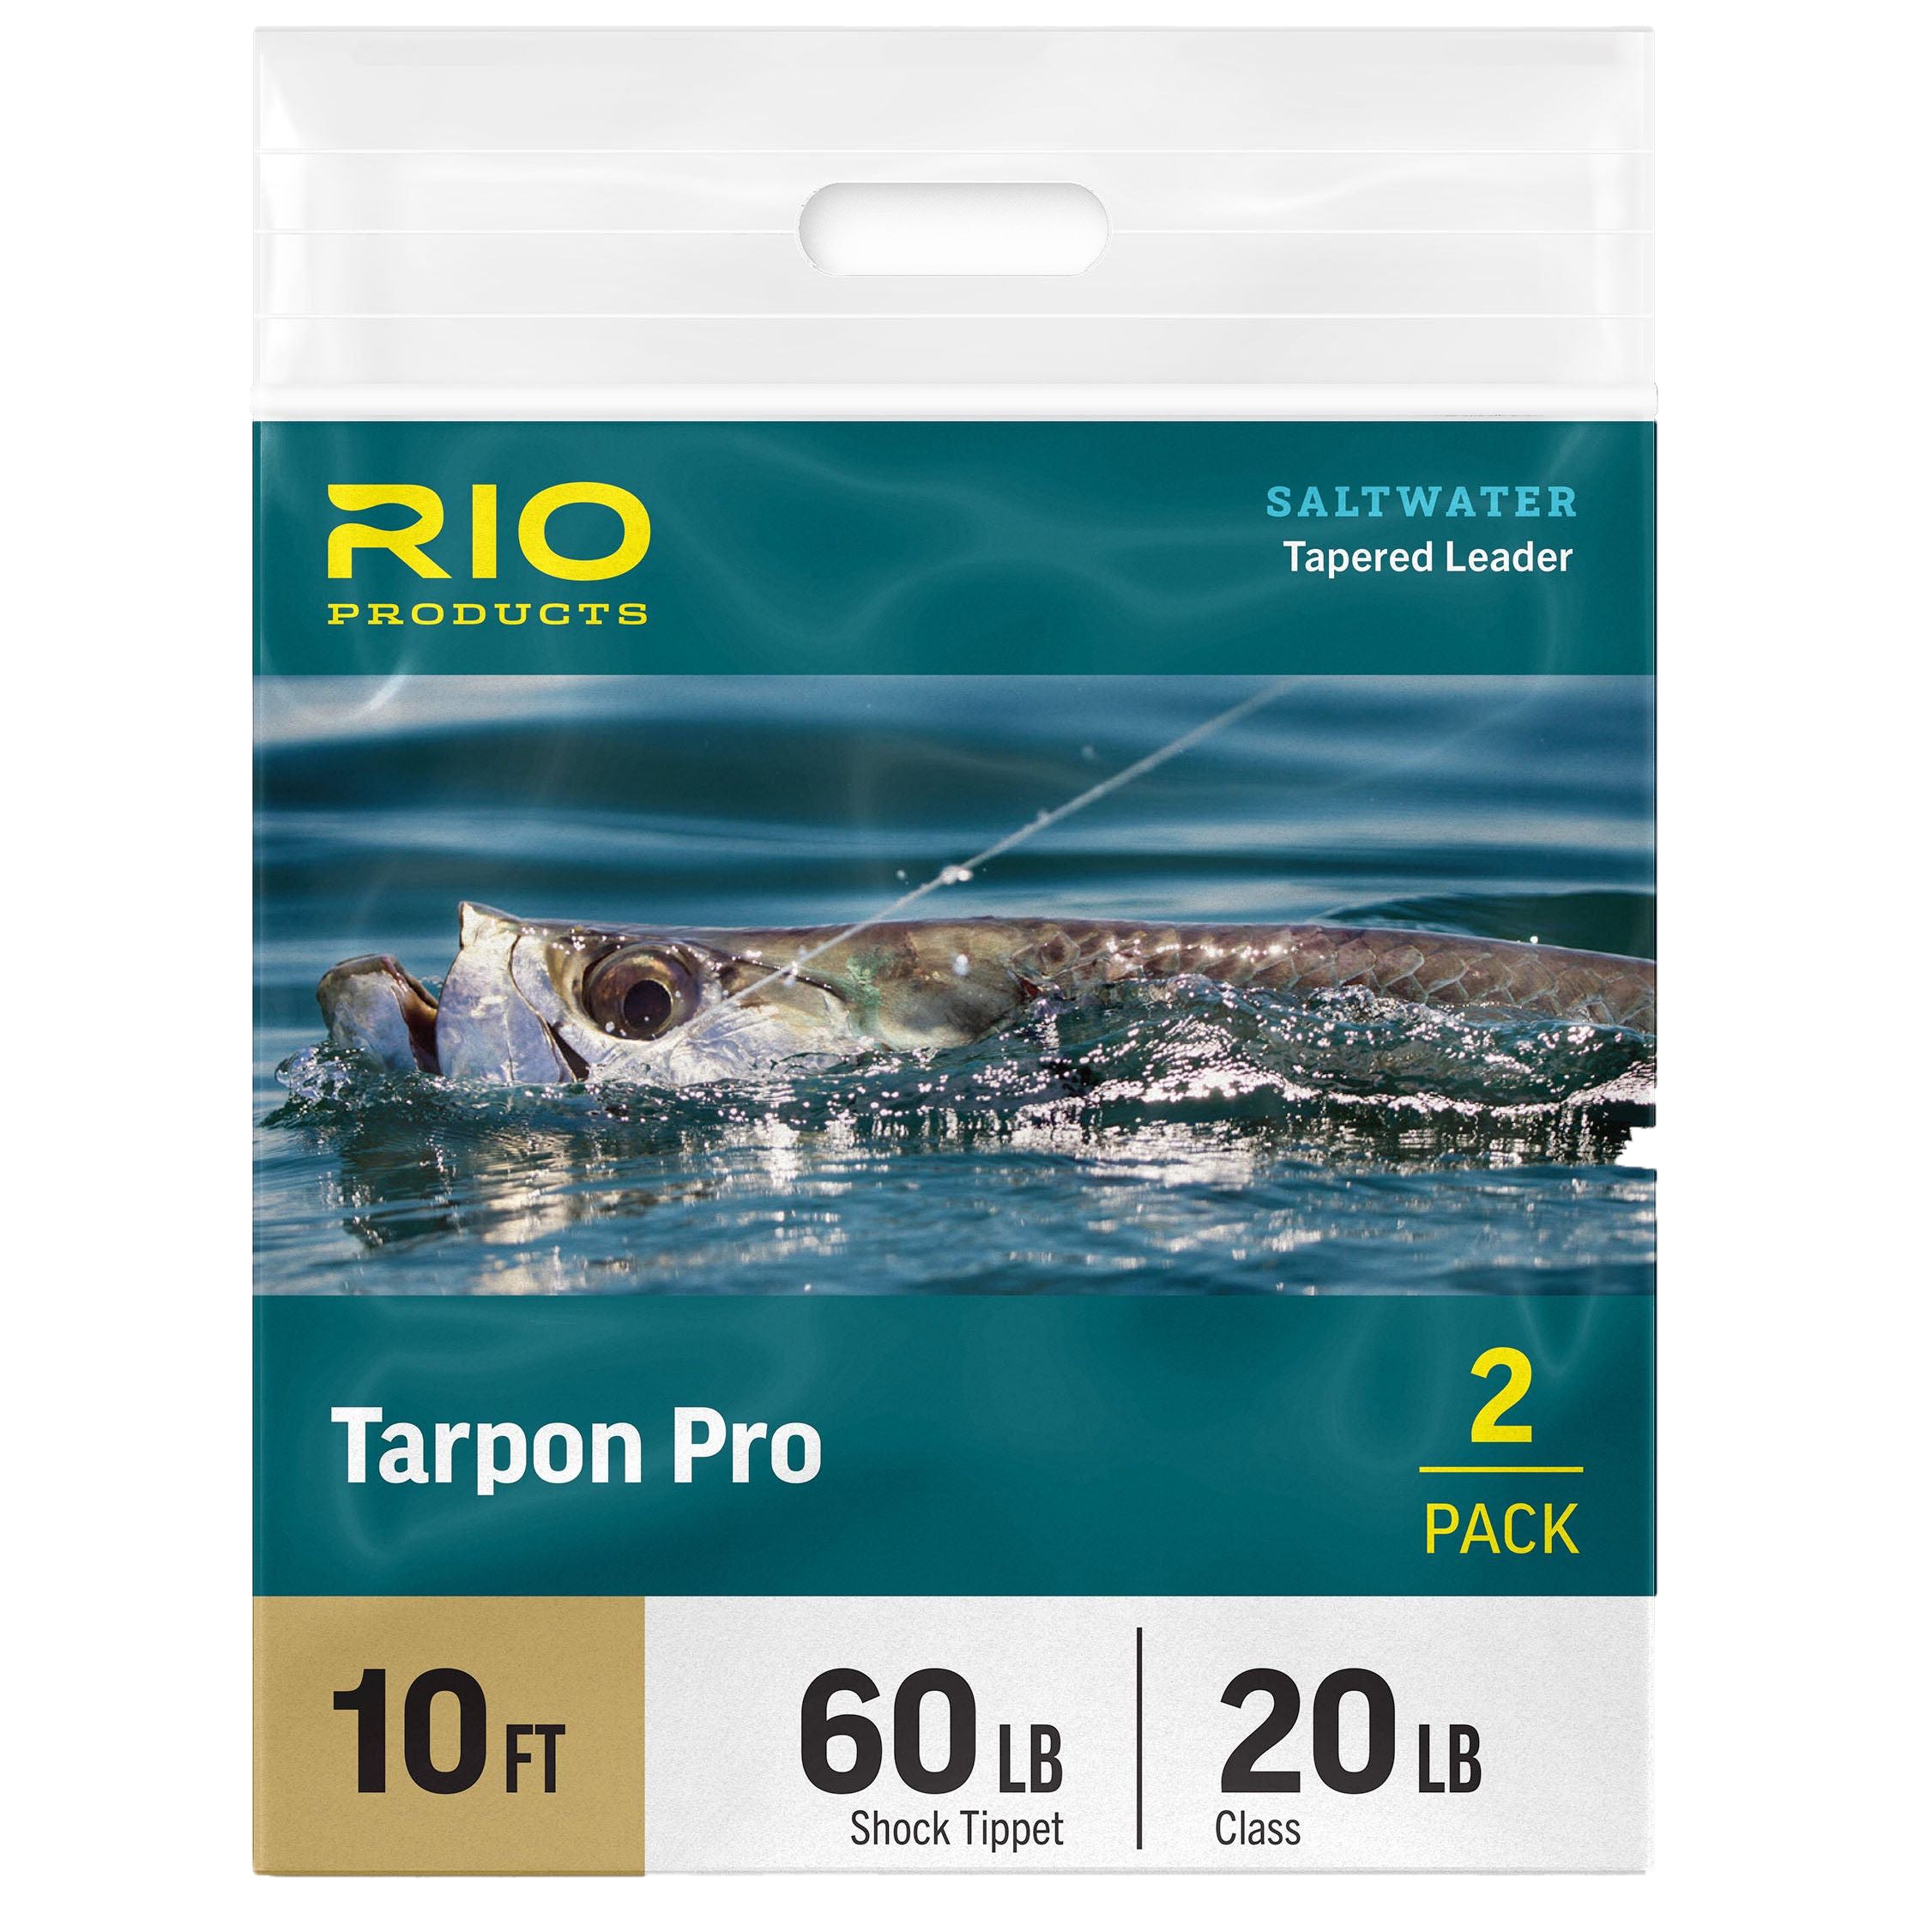 RIO PRODUCTS